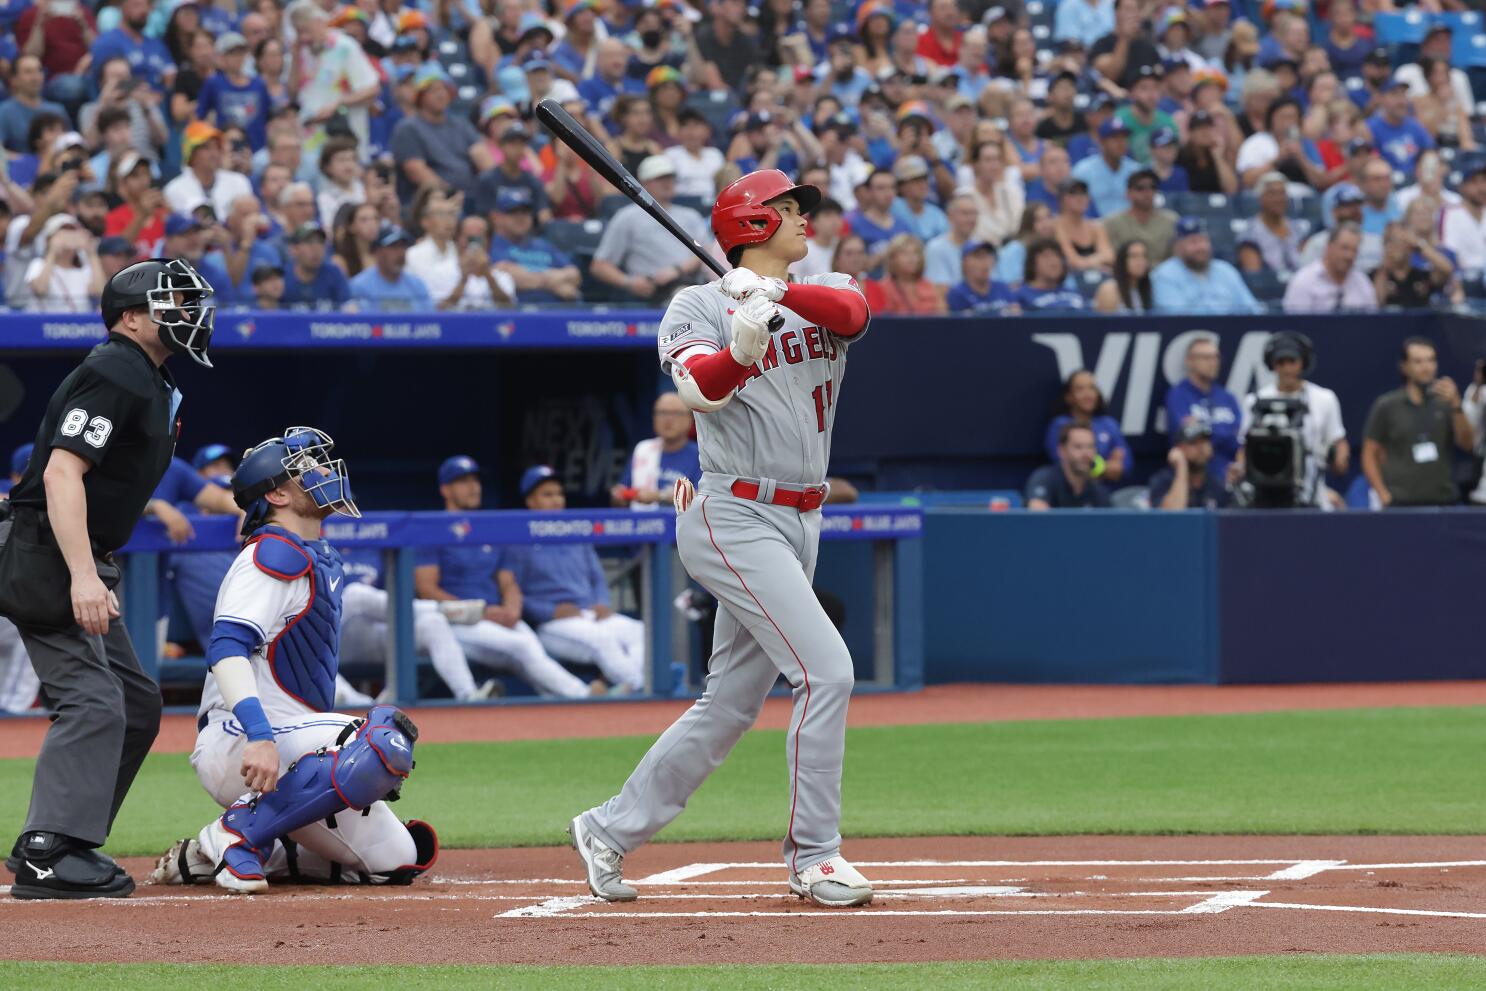 Ohtani hits majors-best 39th HR before leaving game in Angels' 4-1 loss to  Blue Jays